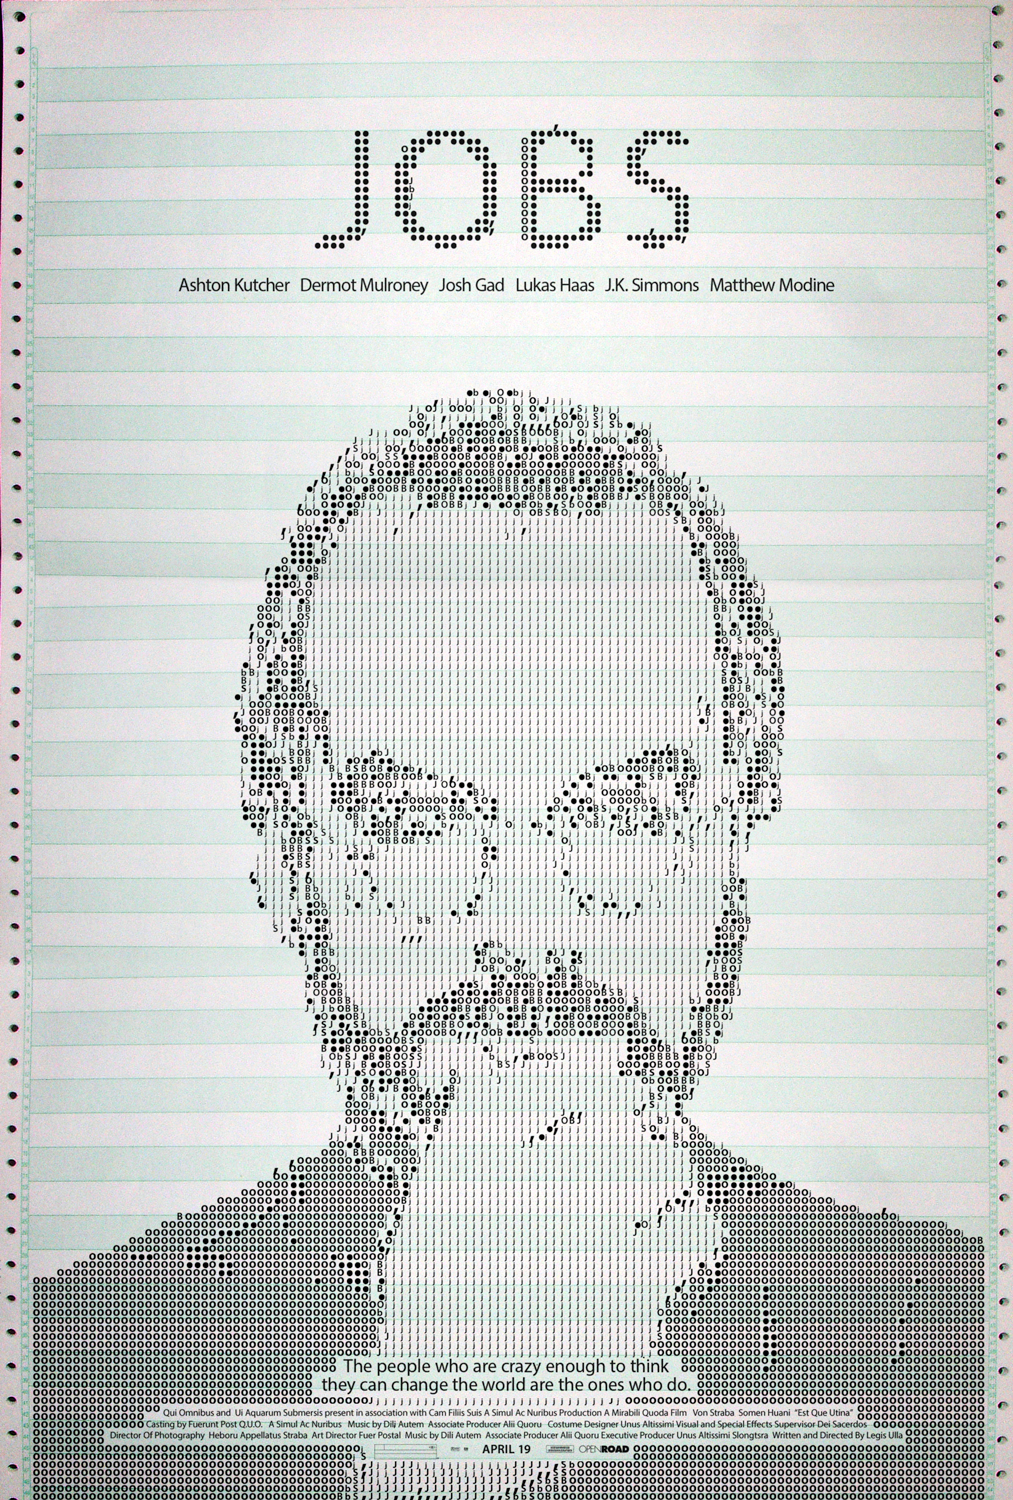 Holms’ film poster for “Jobs” features Myriad, an Adobe Original used as Apple’s corporate typeface.